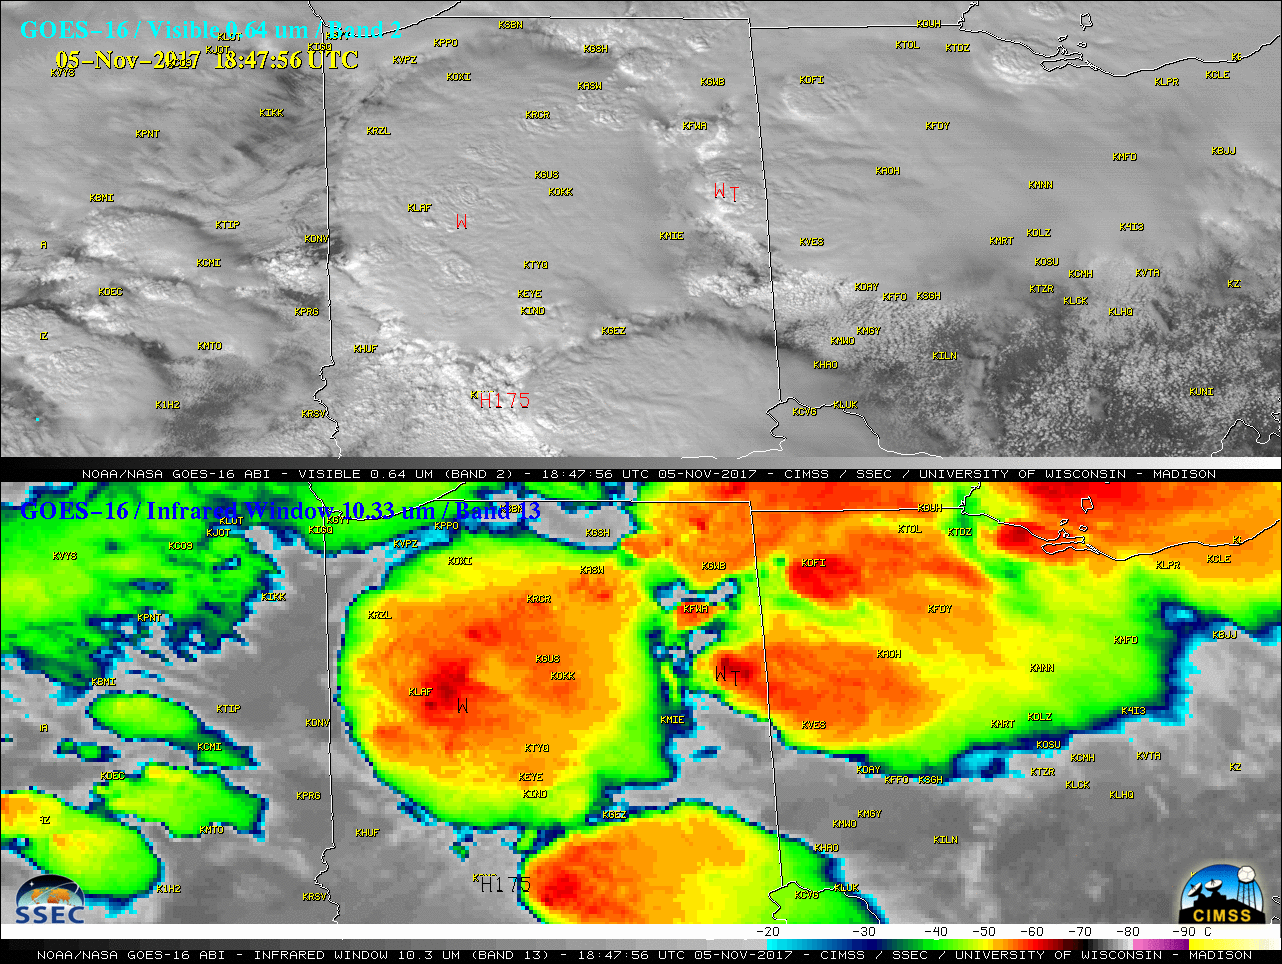 GOES-16 Visible (0.64 µm, top) and Infrared Window (10.3 µm, bottom) images, with SPC storm reports plotted in red (on Visible images) and black (on Infrared images) [click to play MP4 animation]